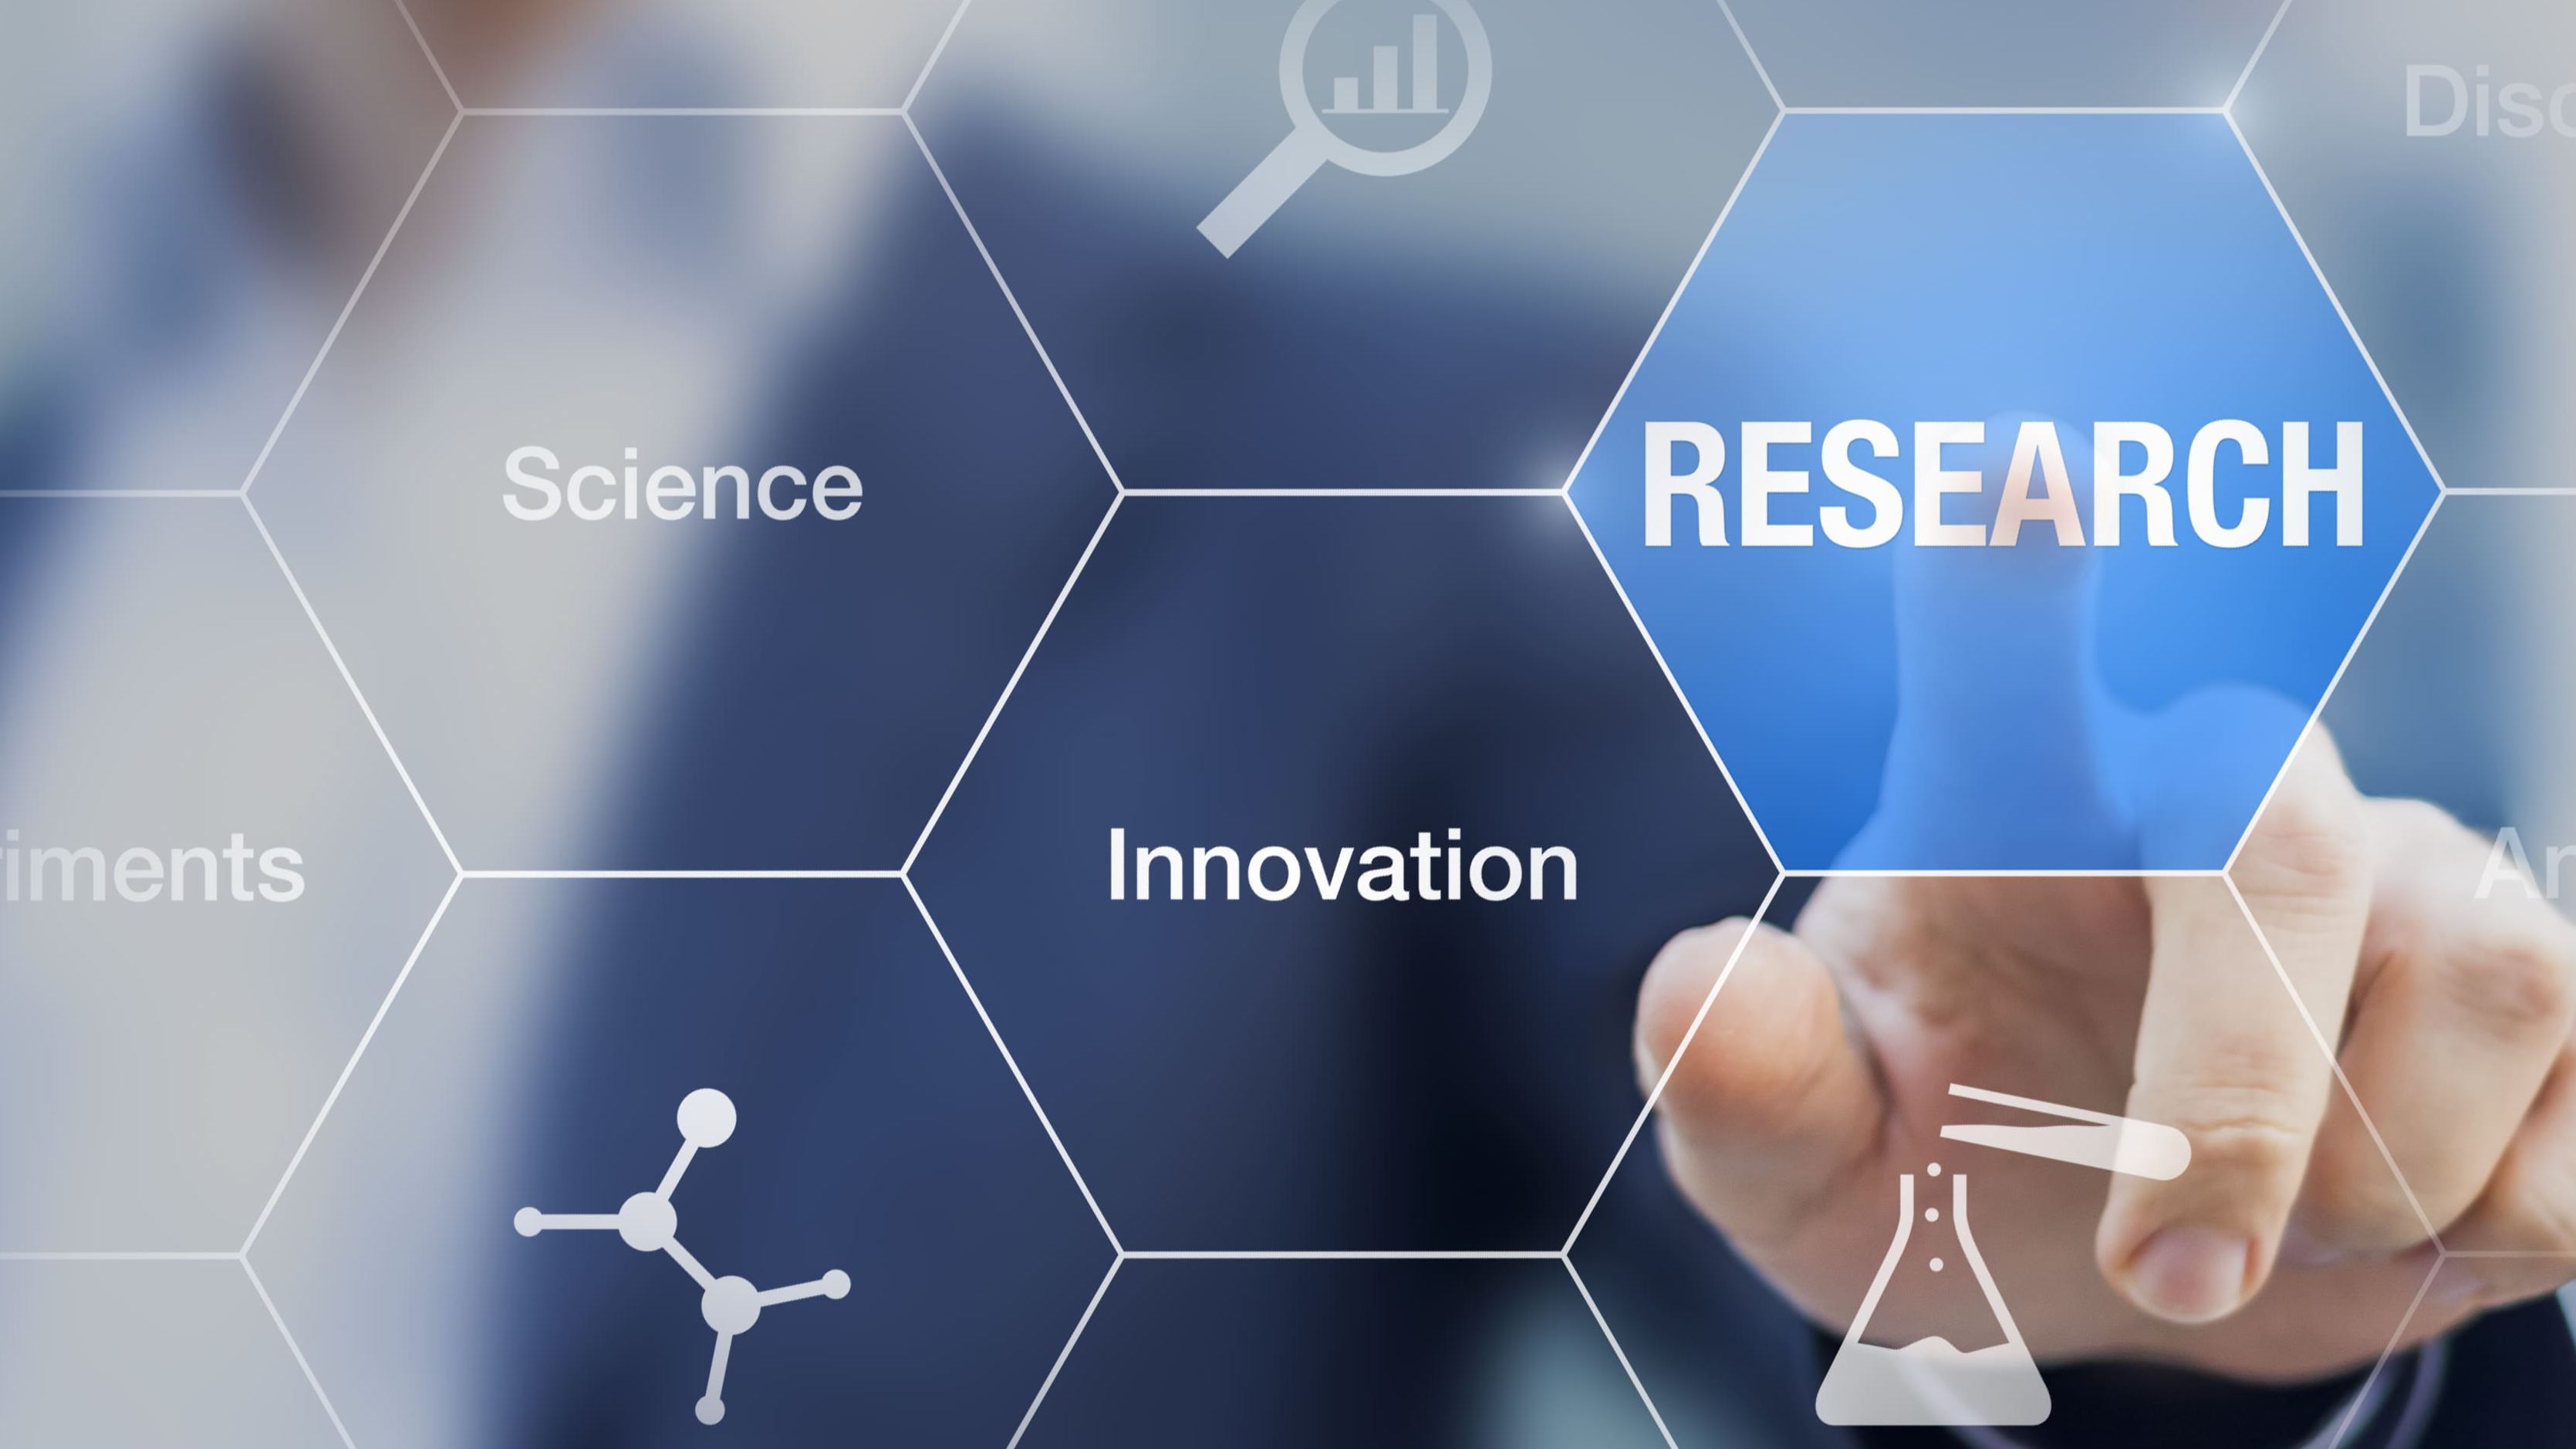 Image showing the words Science, Innovation and Research with a person pointing to Research